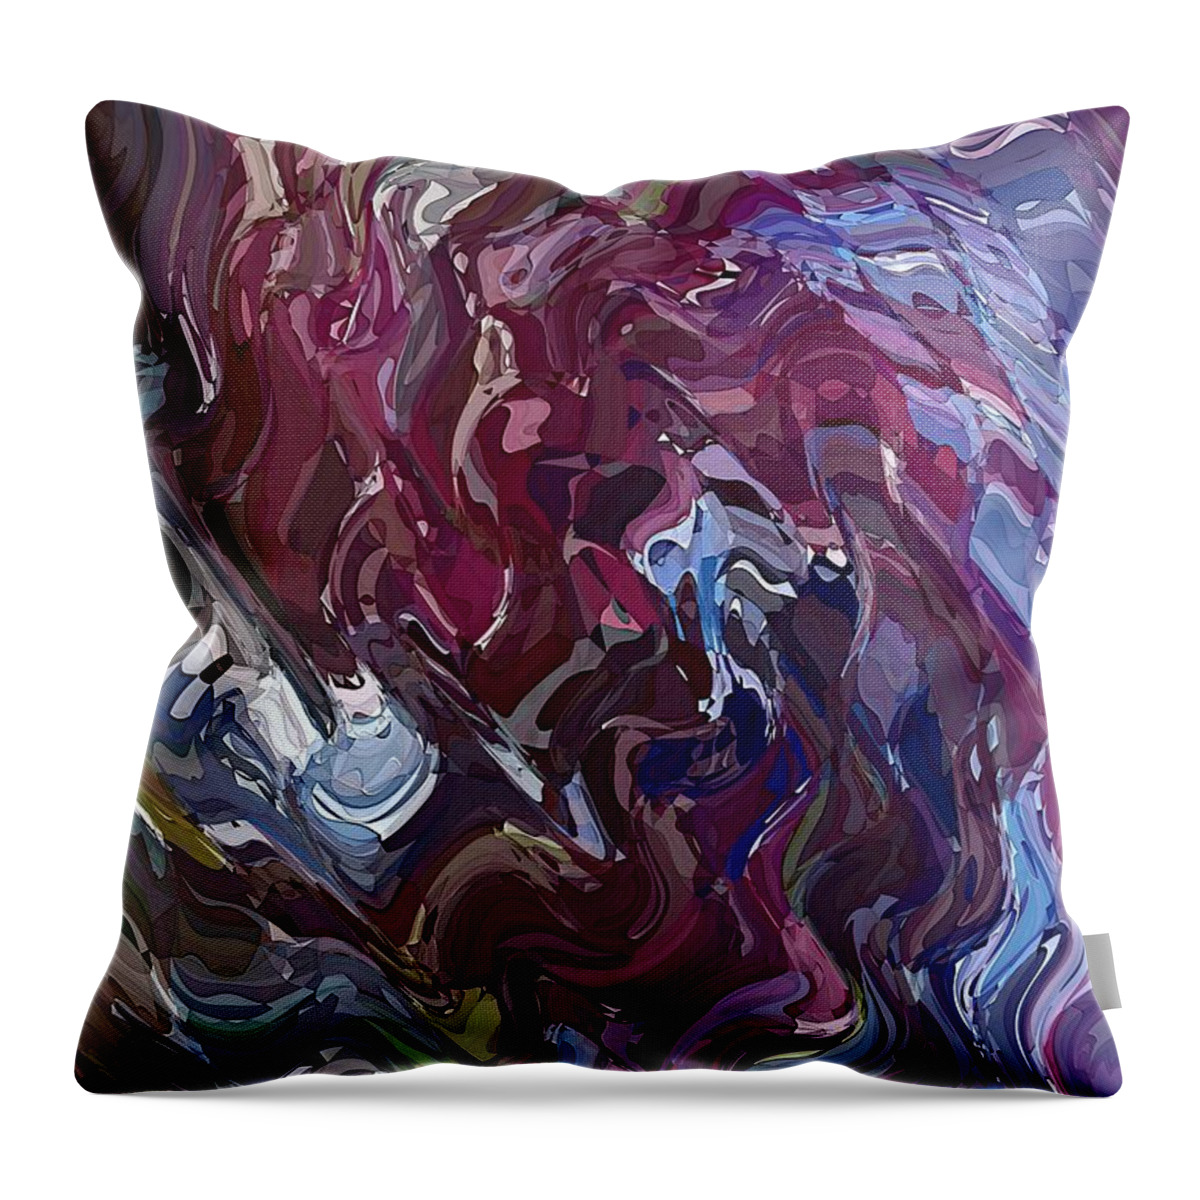 Lilac Throw Pillow featuring the digital art Lilac Oil by David Manlove